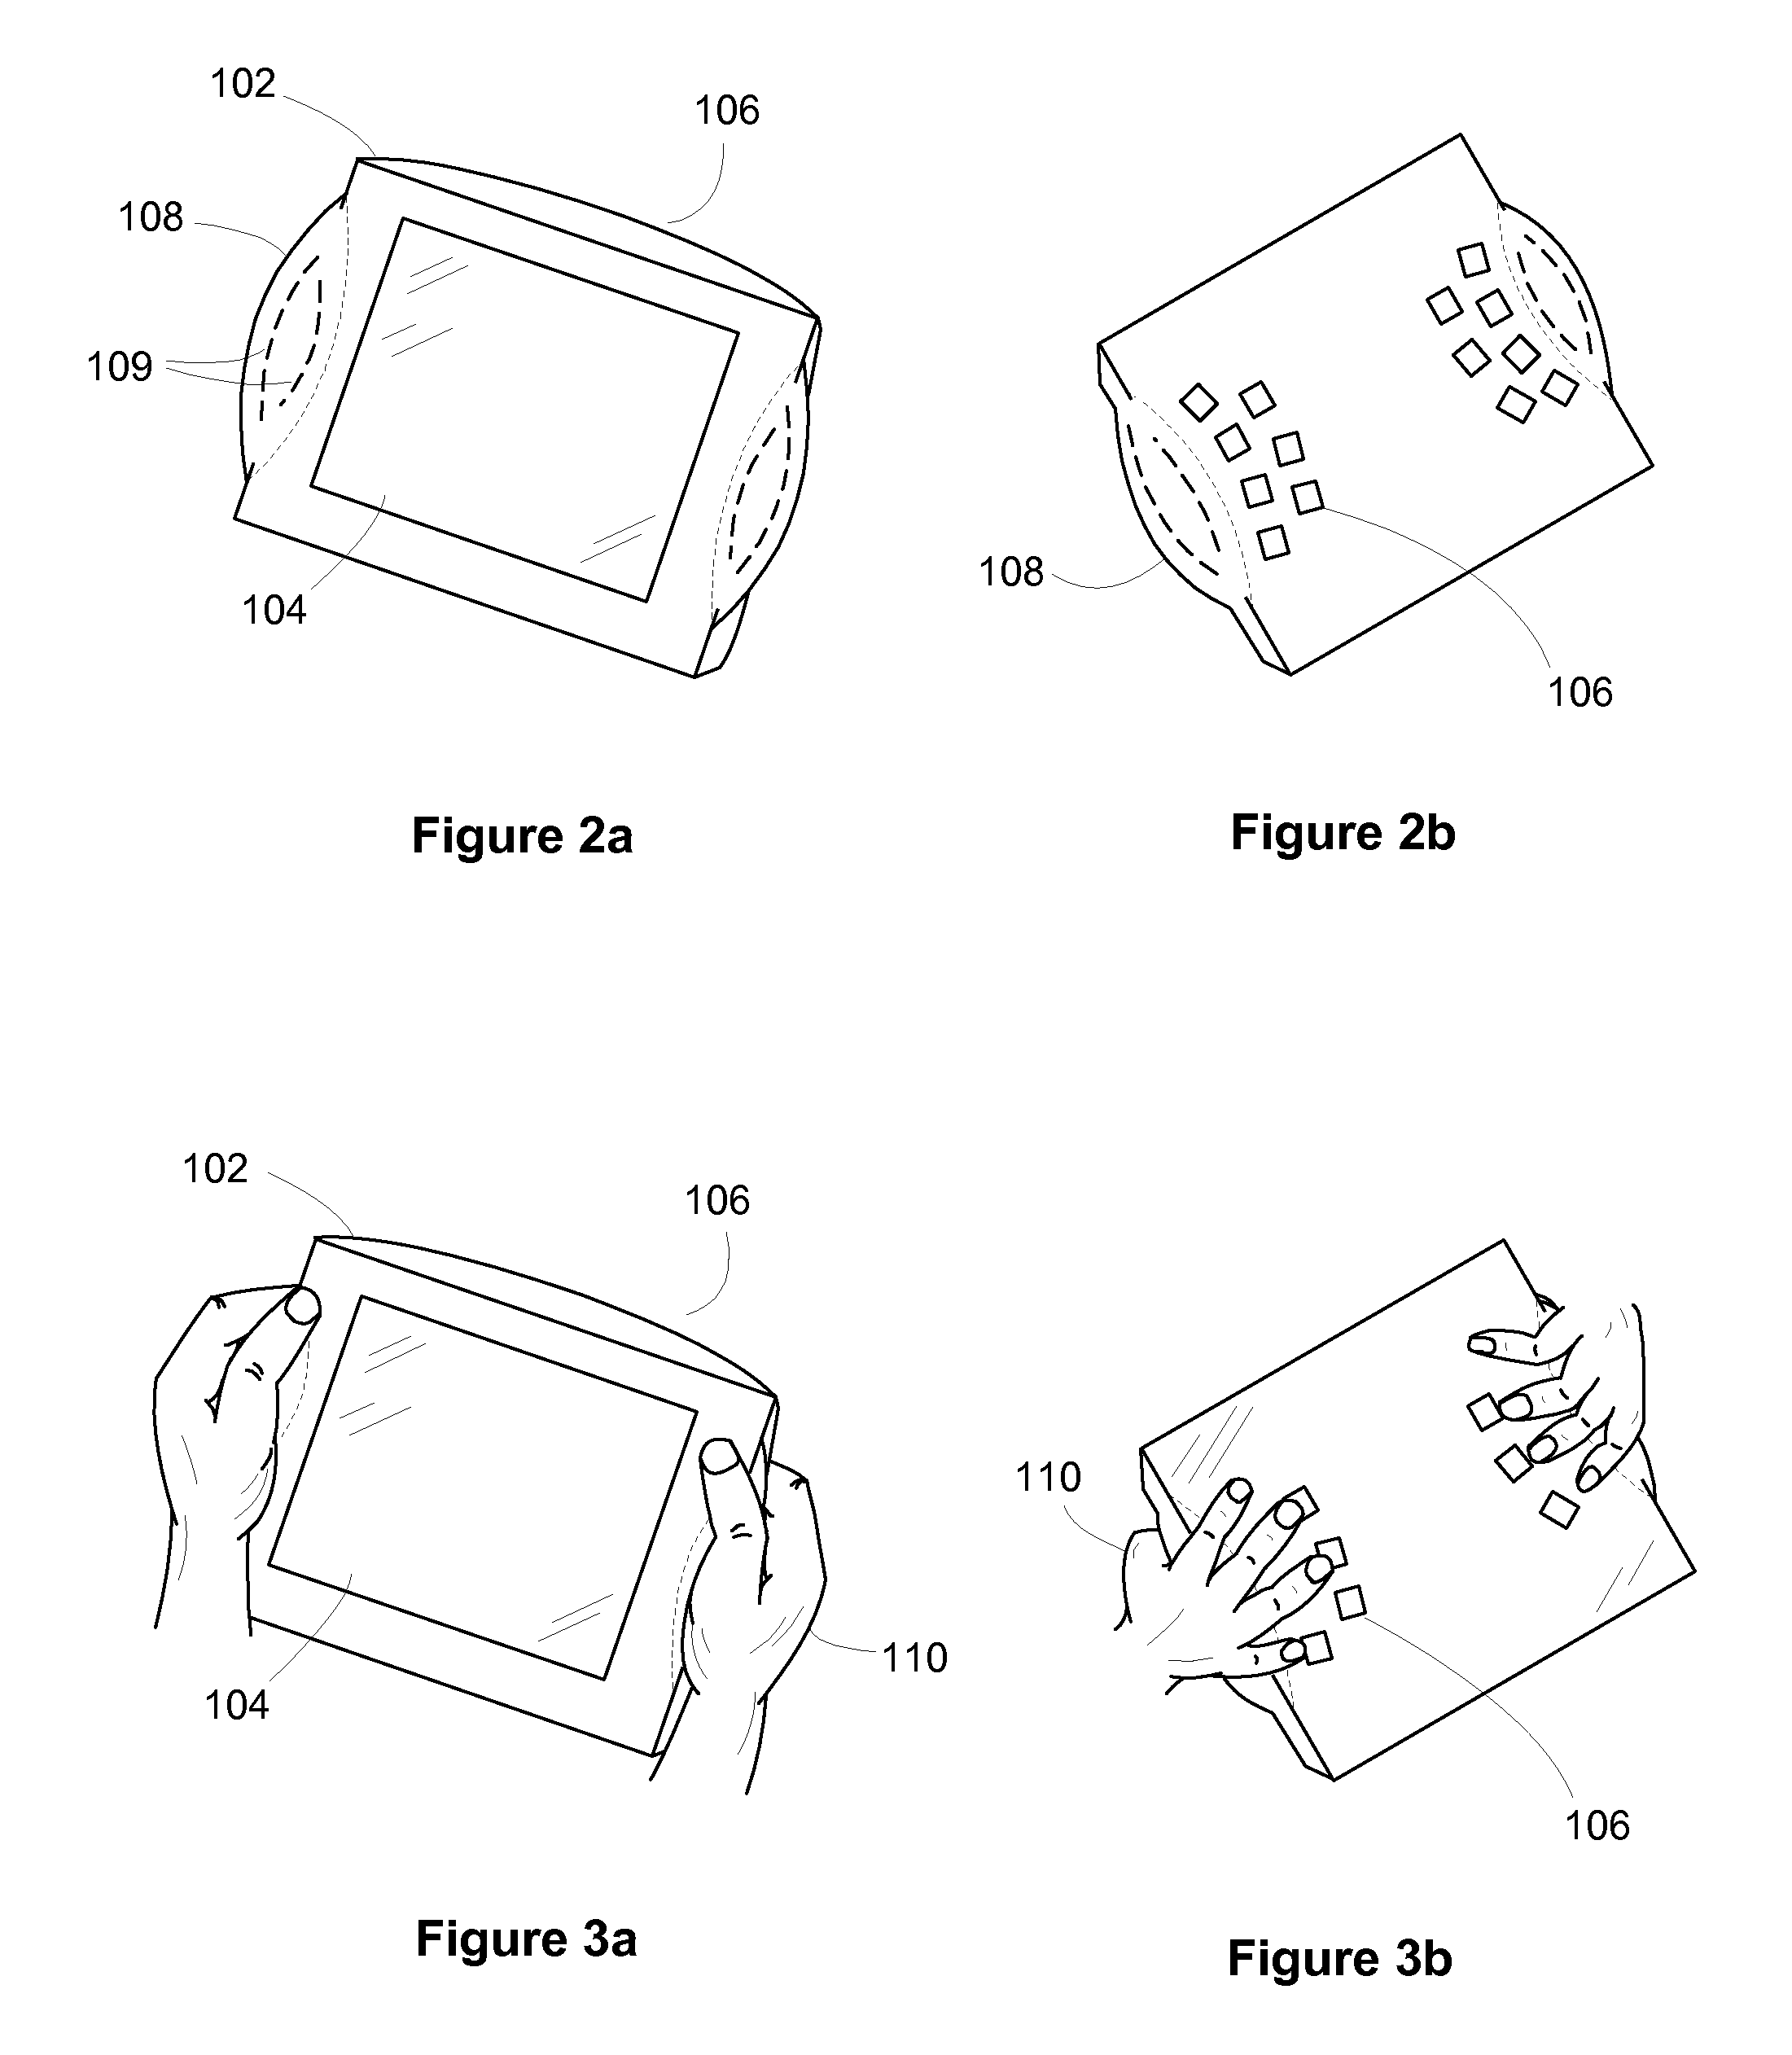 System and method for providing a keyboard type interface for a computing device